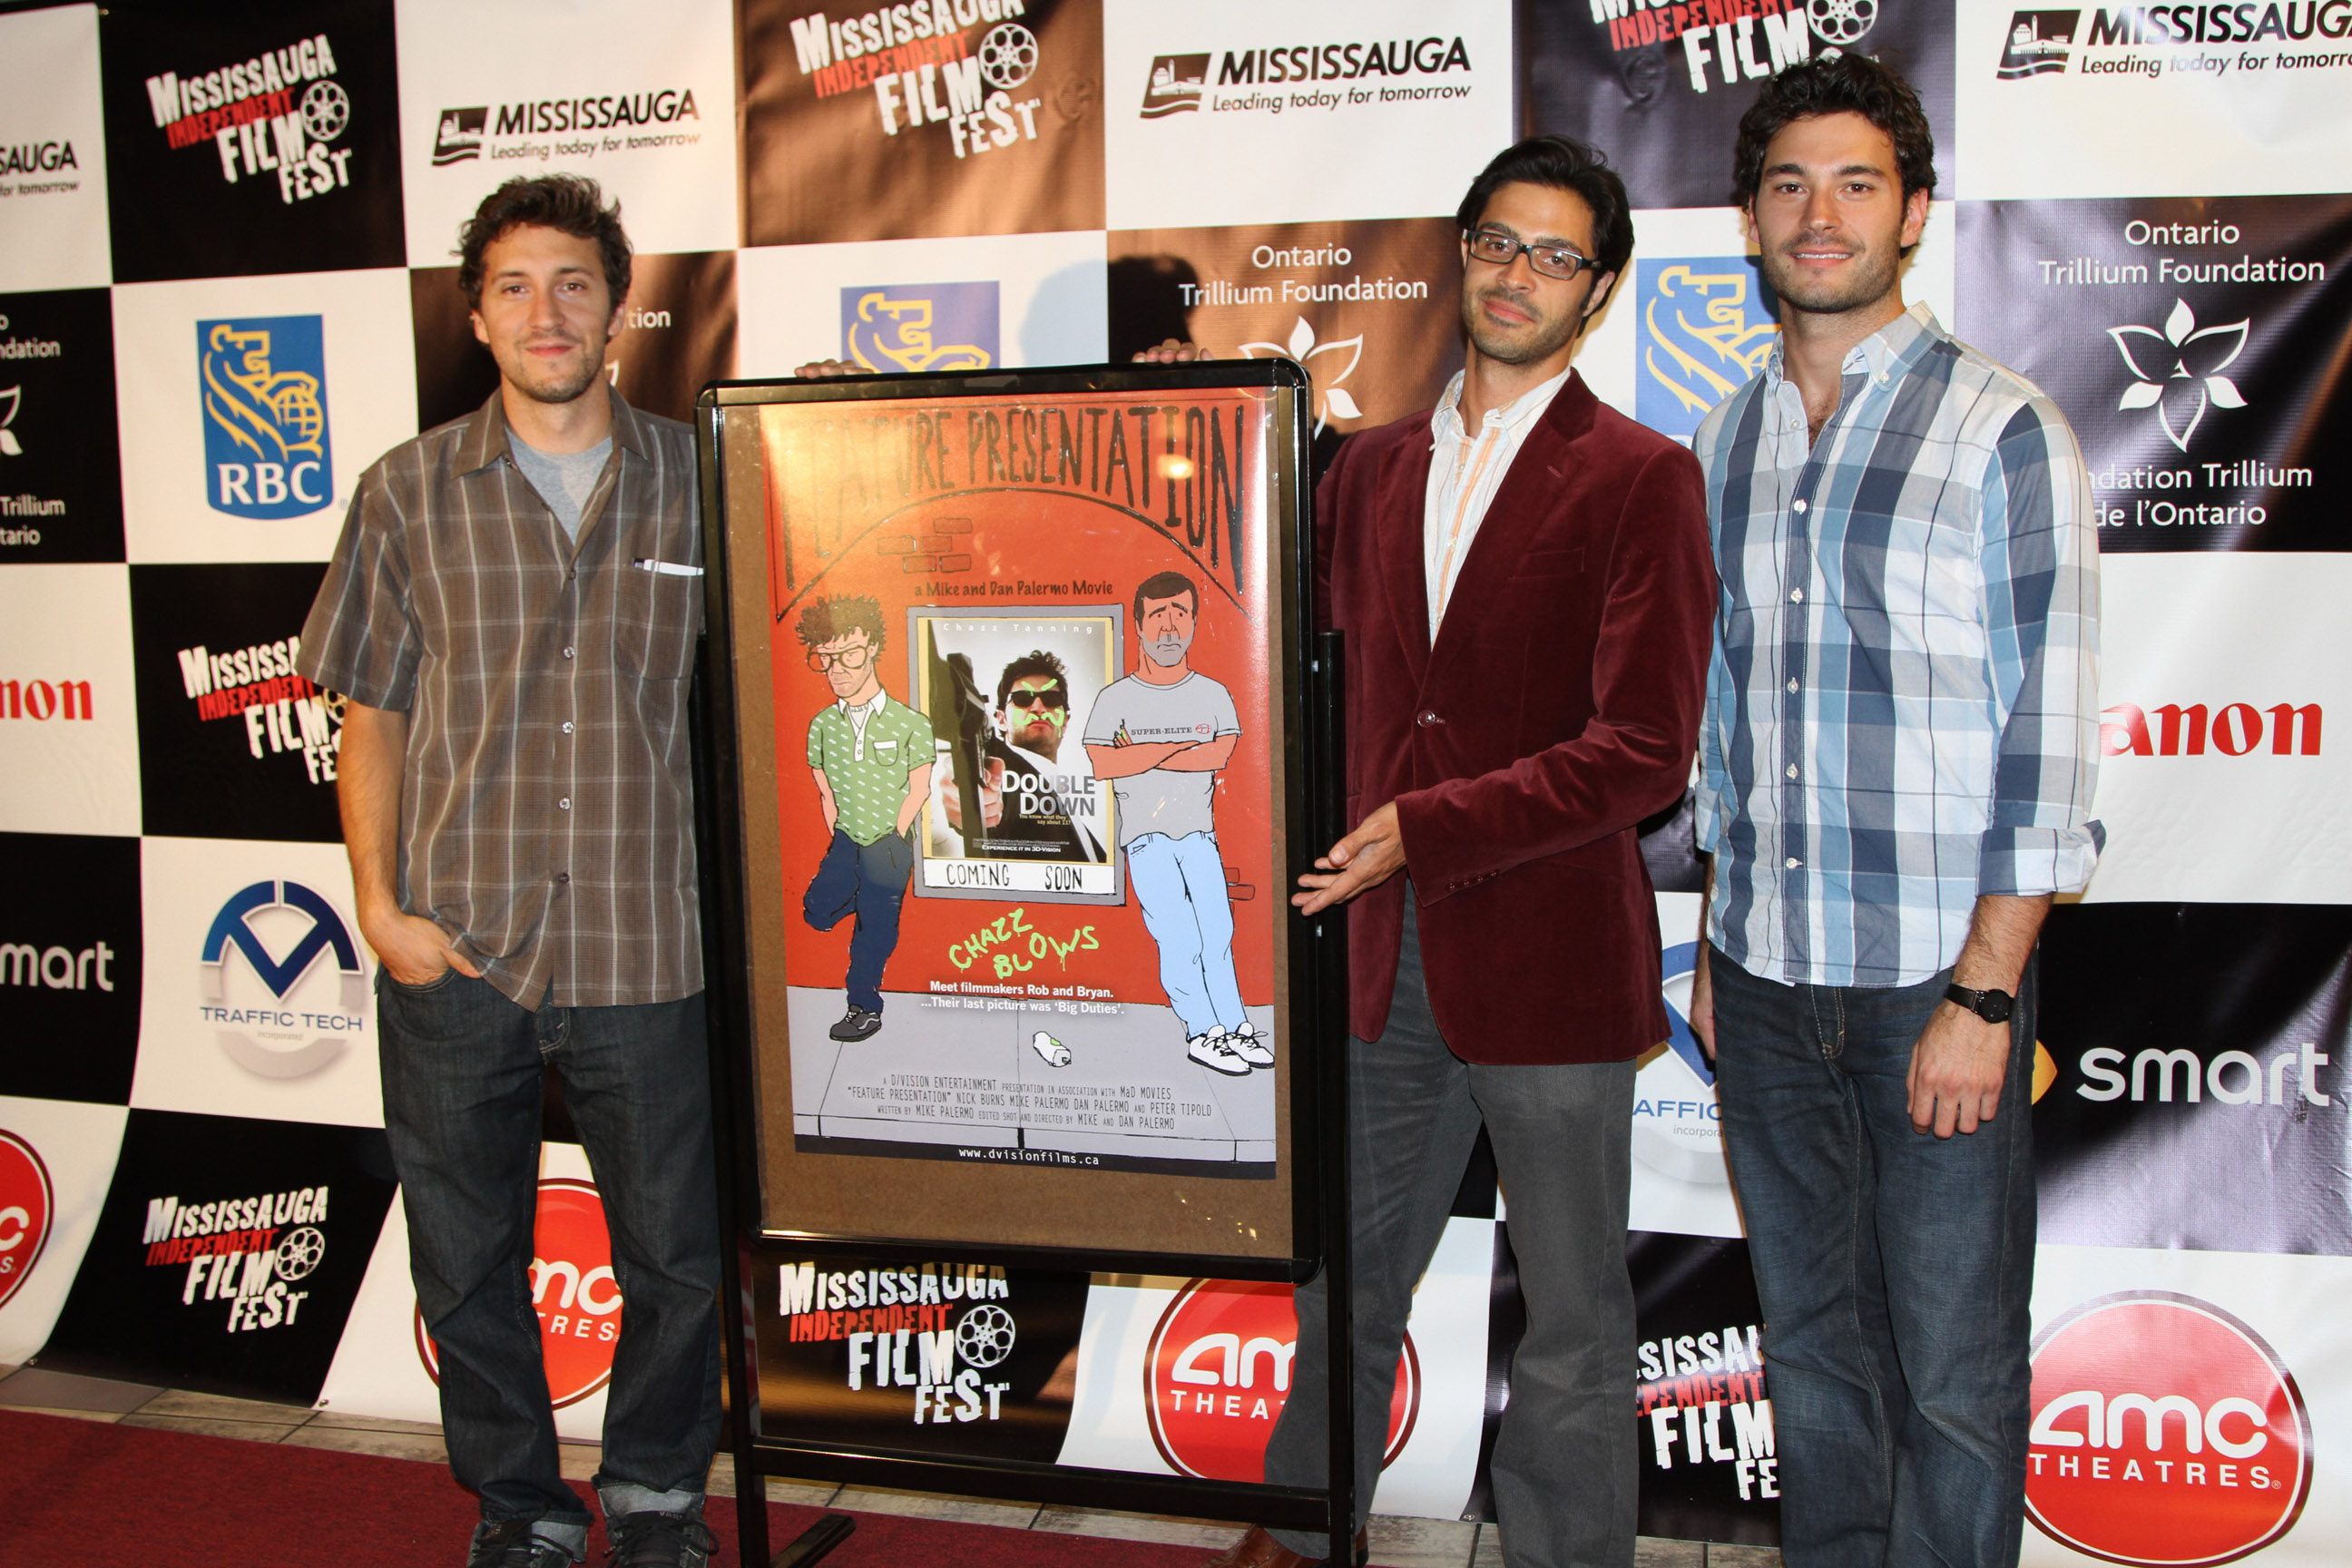 Mike Palermo, Matt Campagna, and Dan Palermo at the first screening of 